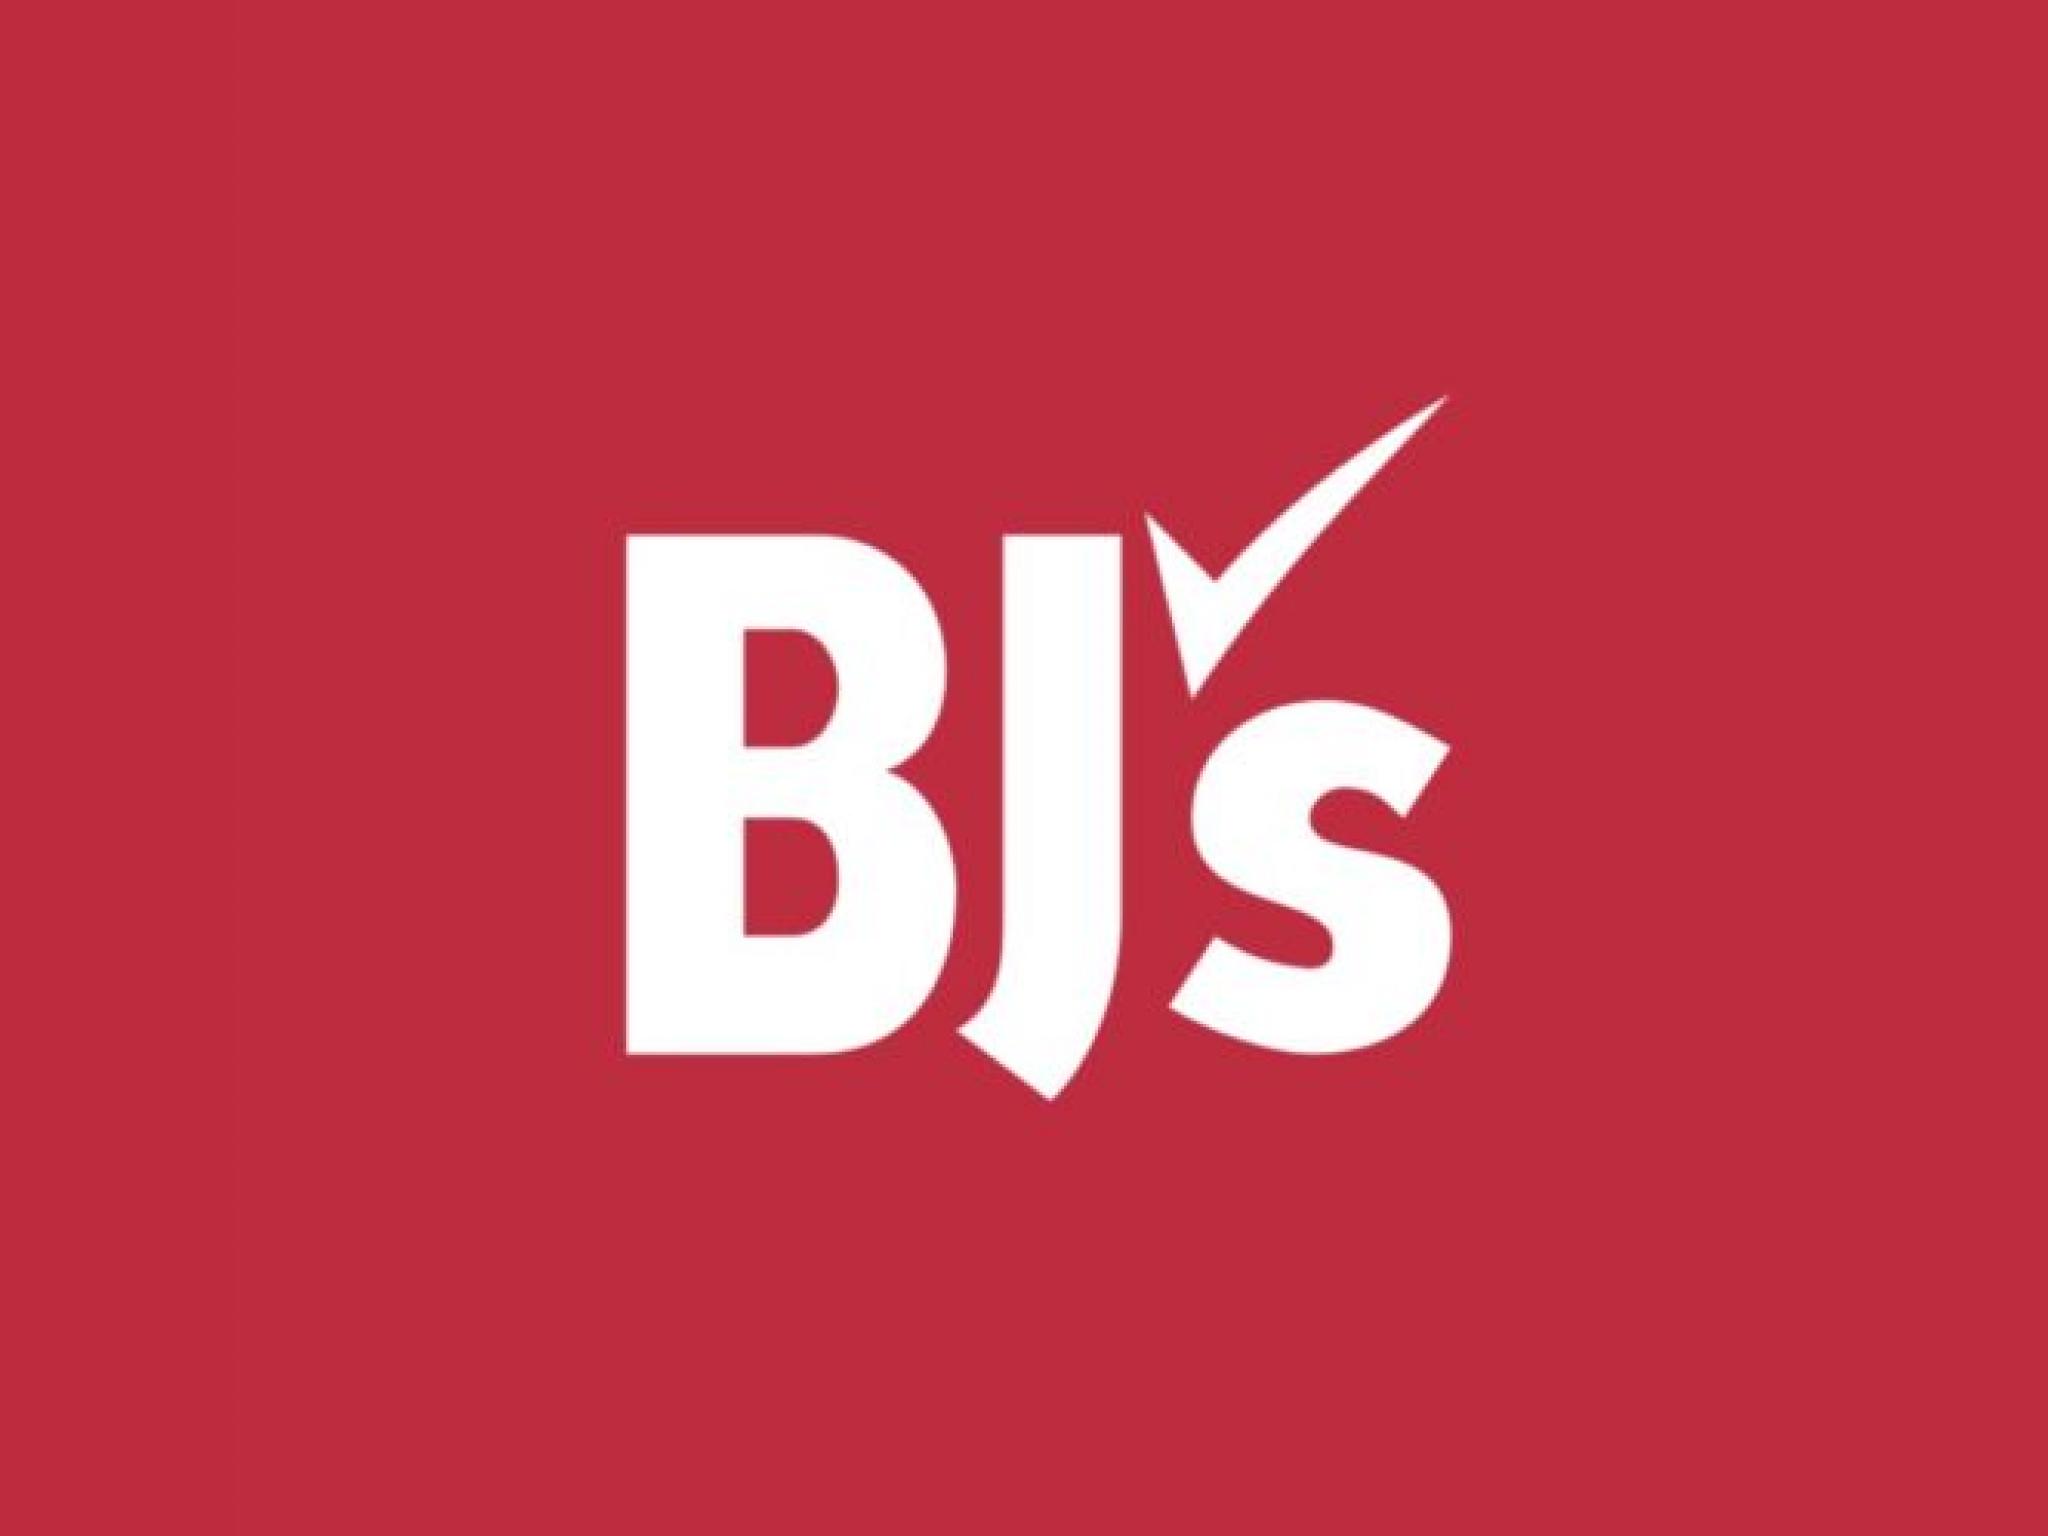  bjs-wholesale-club-likely-to-report-lower-q1-earnings-here-are-the-recent-forecast-changes-from-wall-streets-most-accurate-analysts 